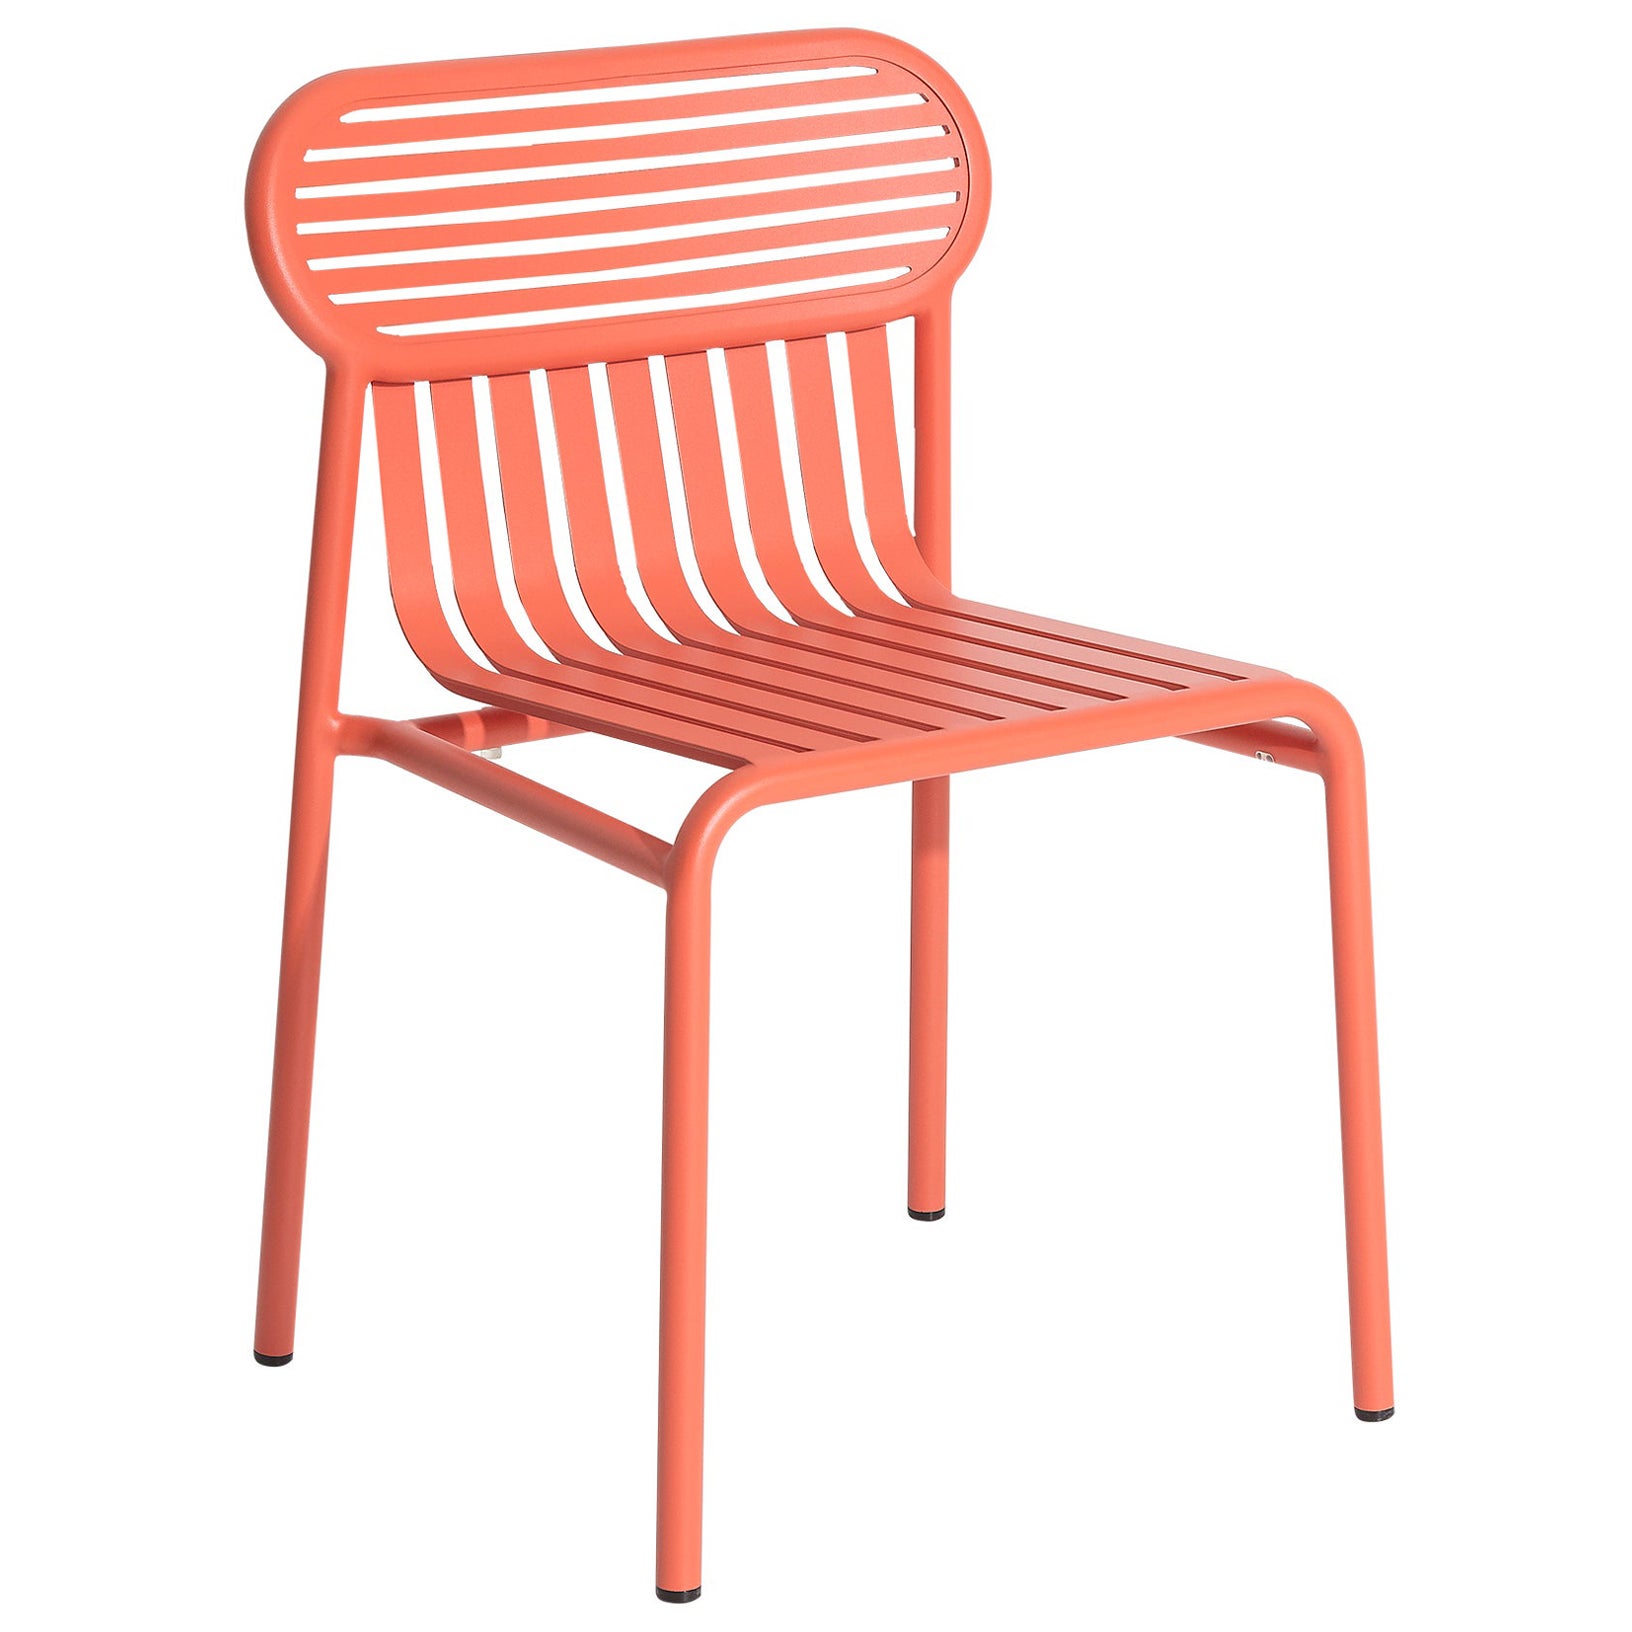 Petite Friture Week-End Chair in Coral Aluminium by Studio BrichetZiegler For Sale